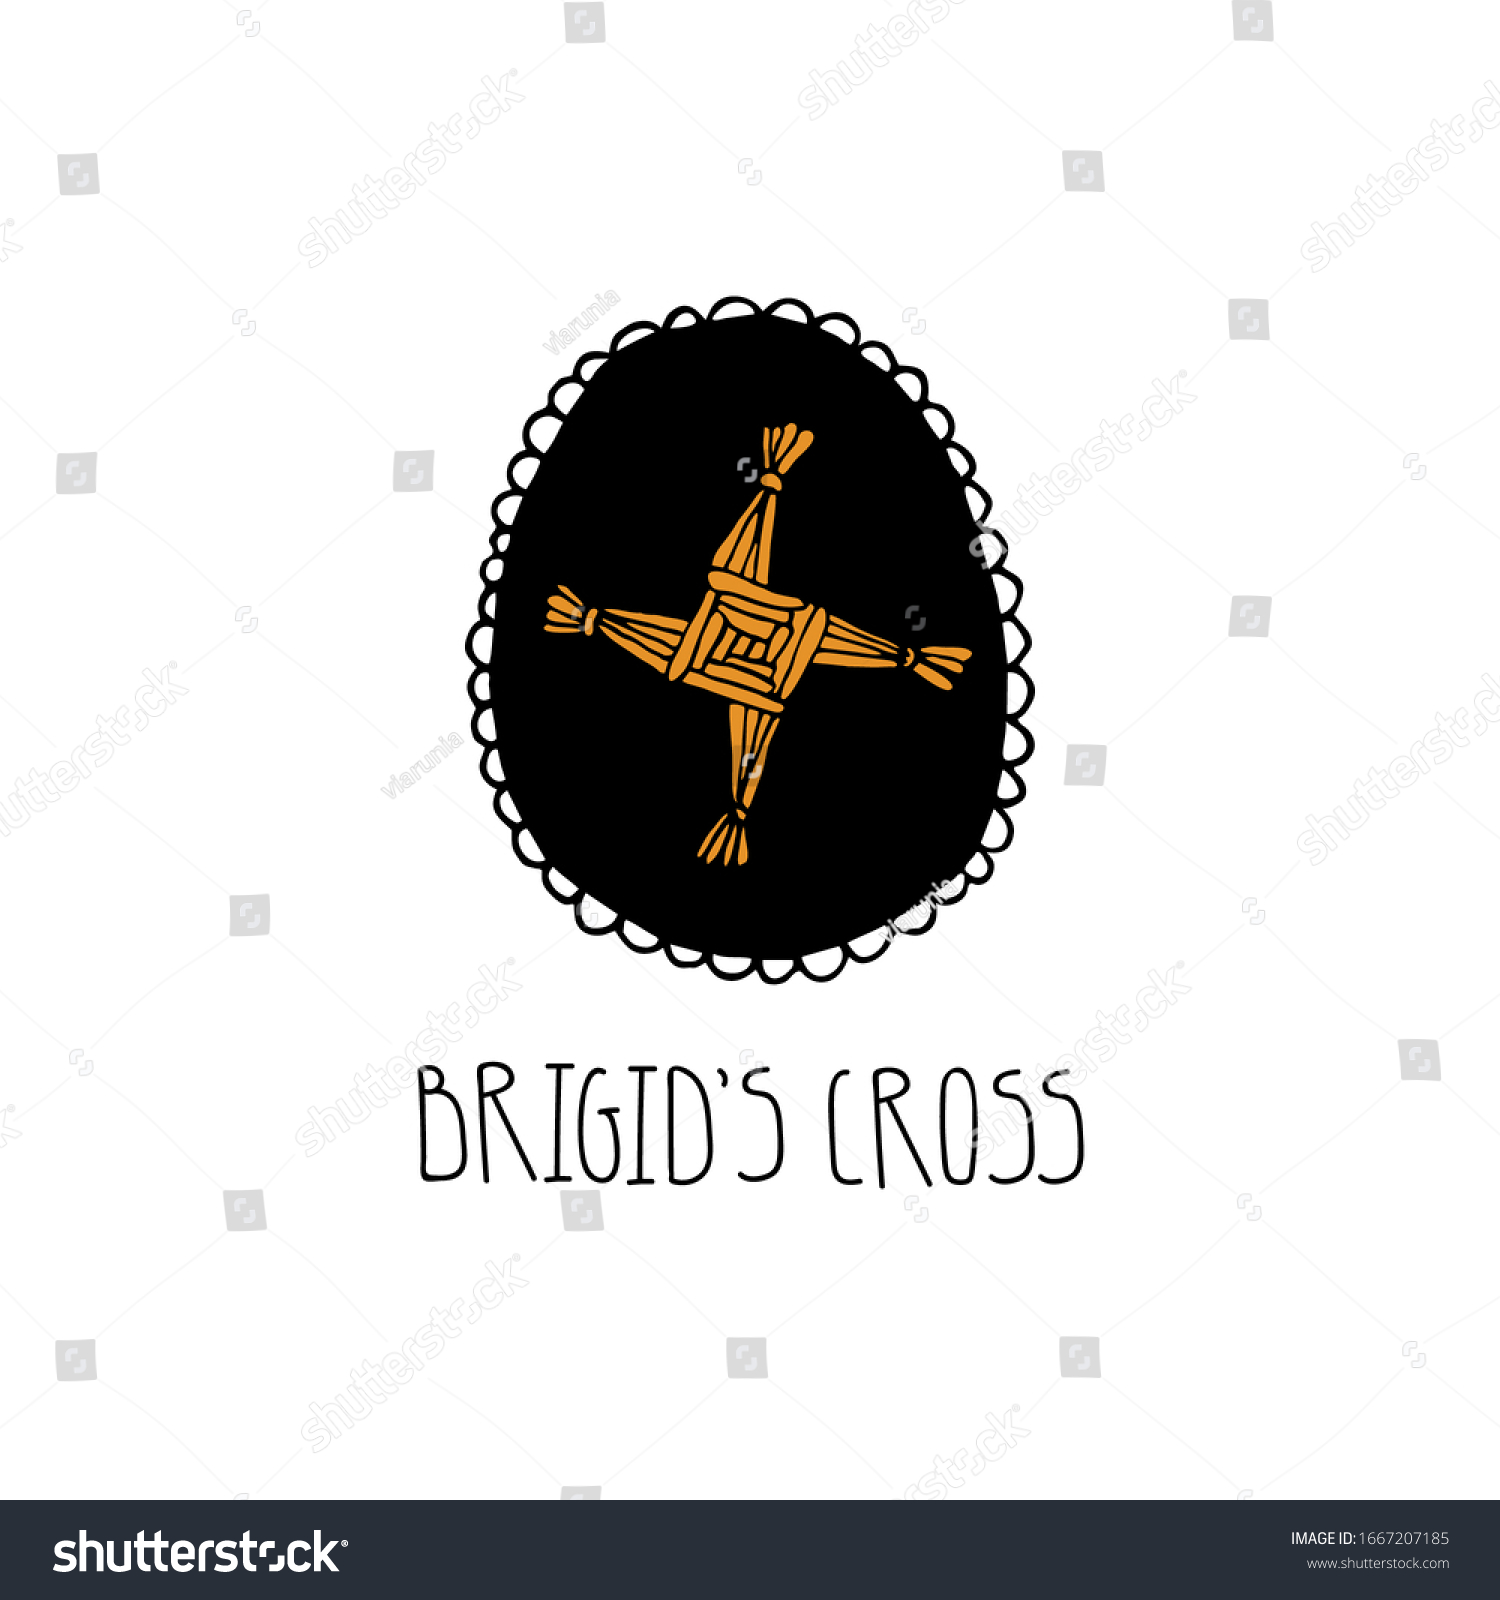 SVG of St. Brigid's cross vector illustration in a hand drawn medieval style. Imbolc celebration and wheel of the year concept. Vintage logo, emblem with lettering svg